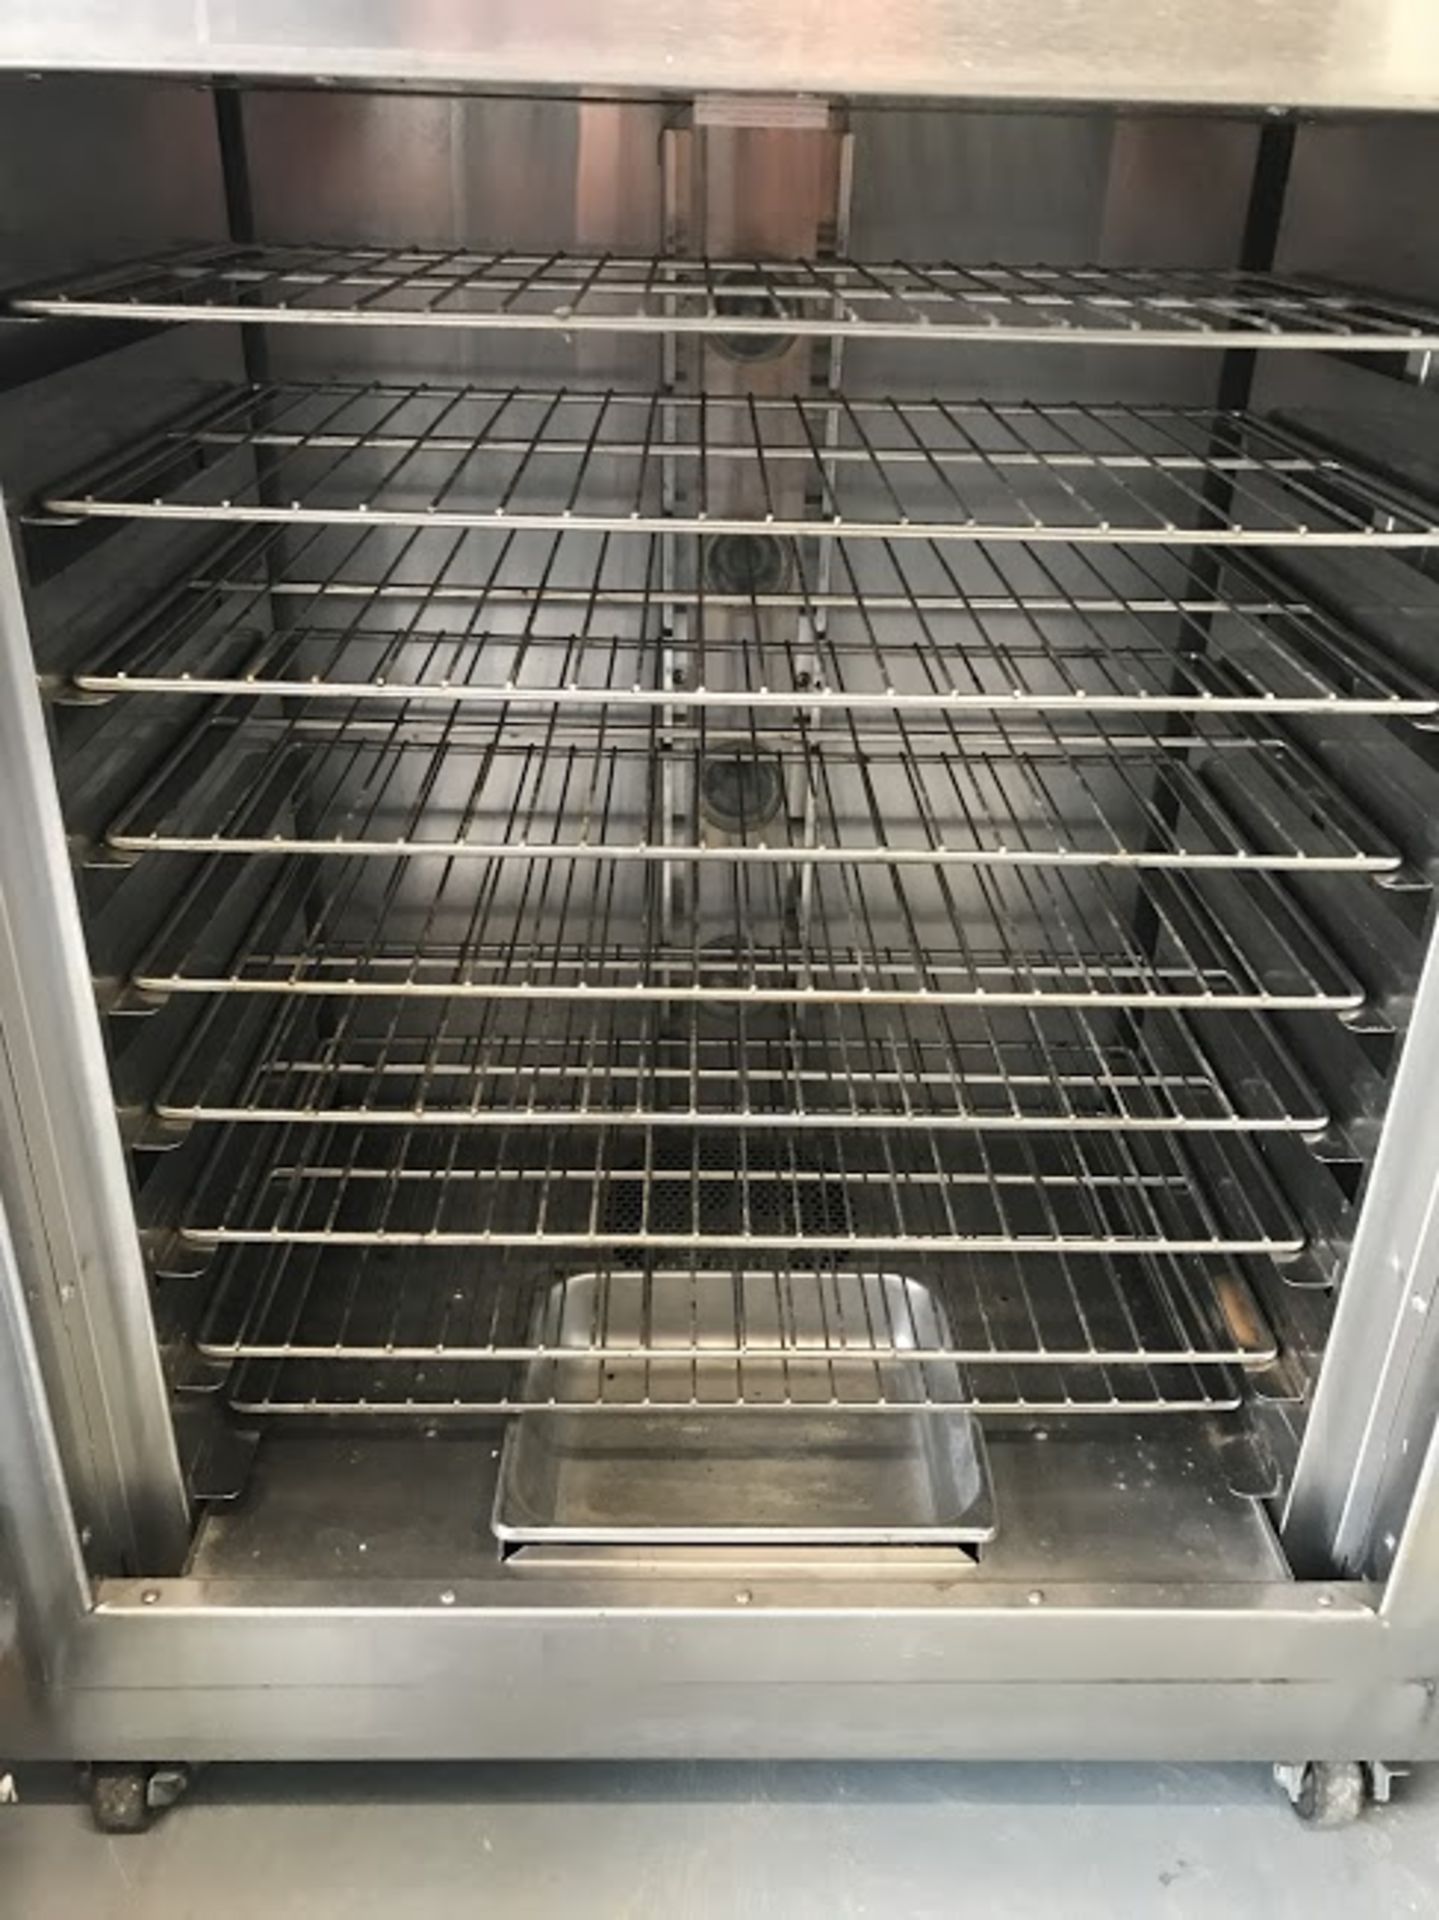 Duke AHPO-618 Bakery Oven and Proofer - Image 2 of 4